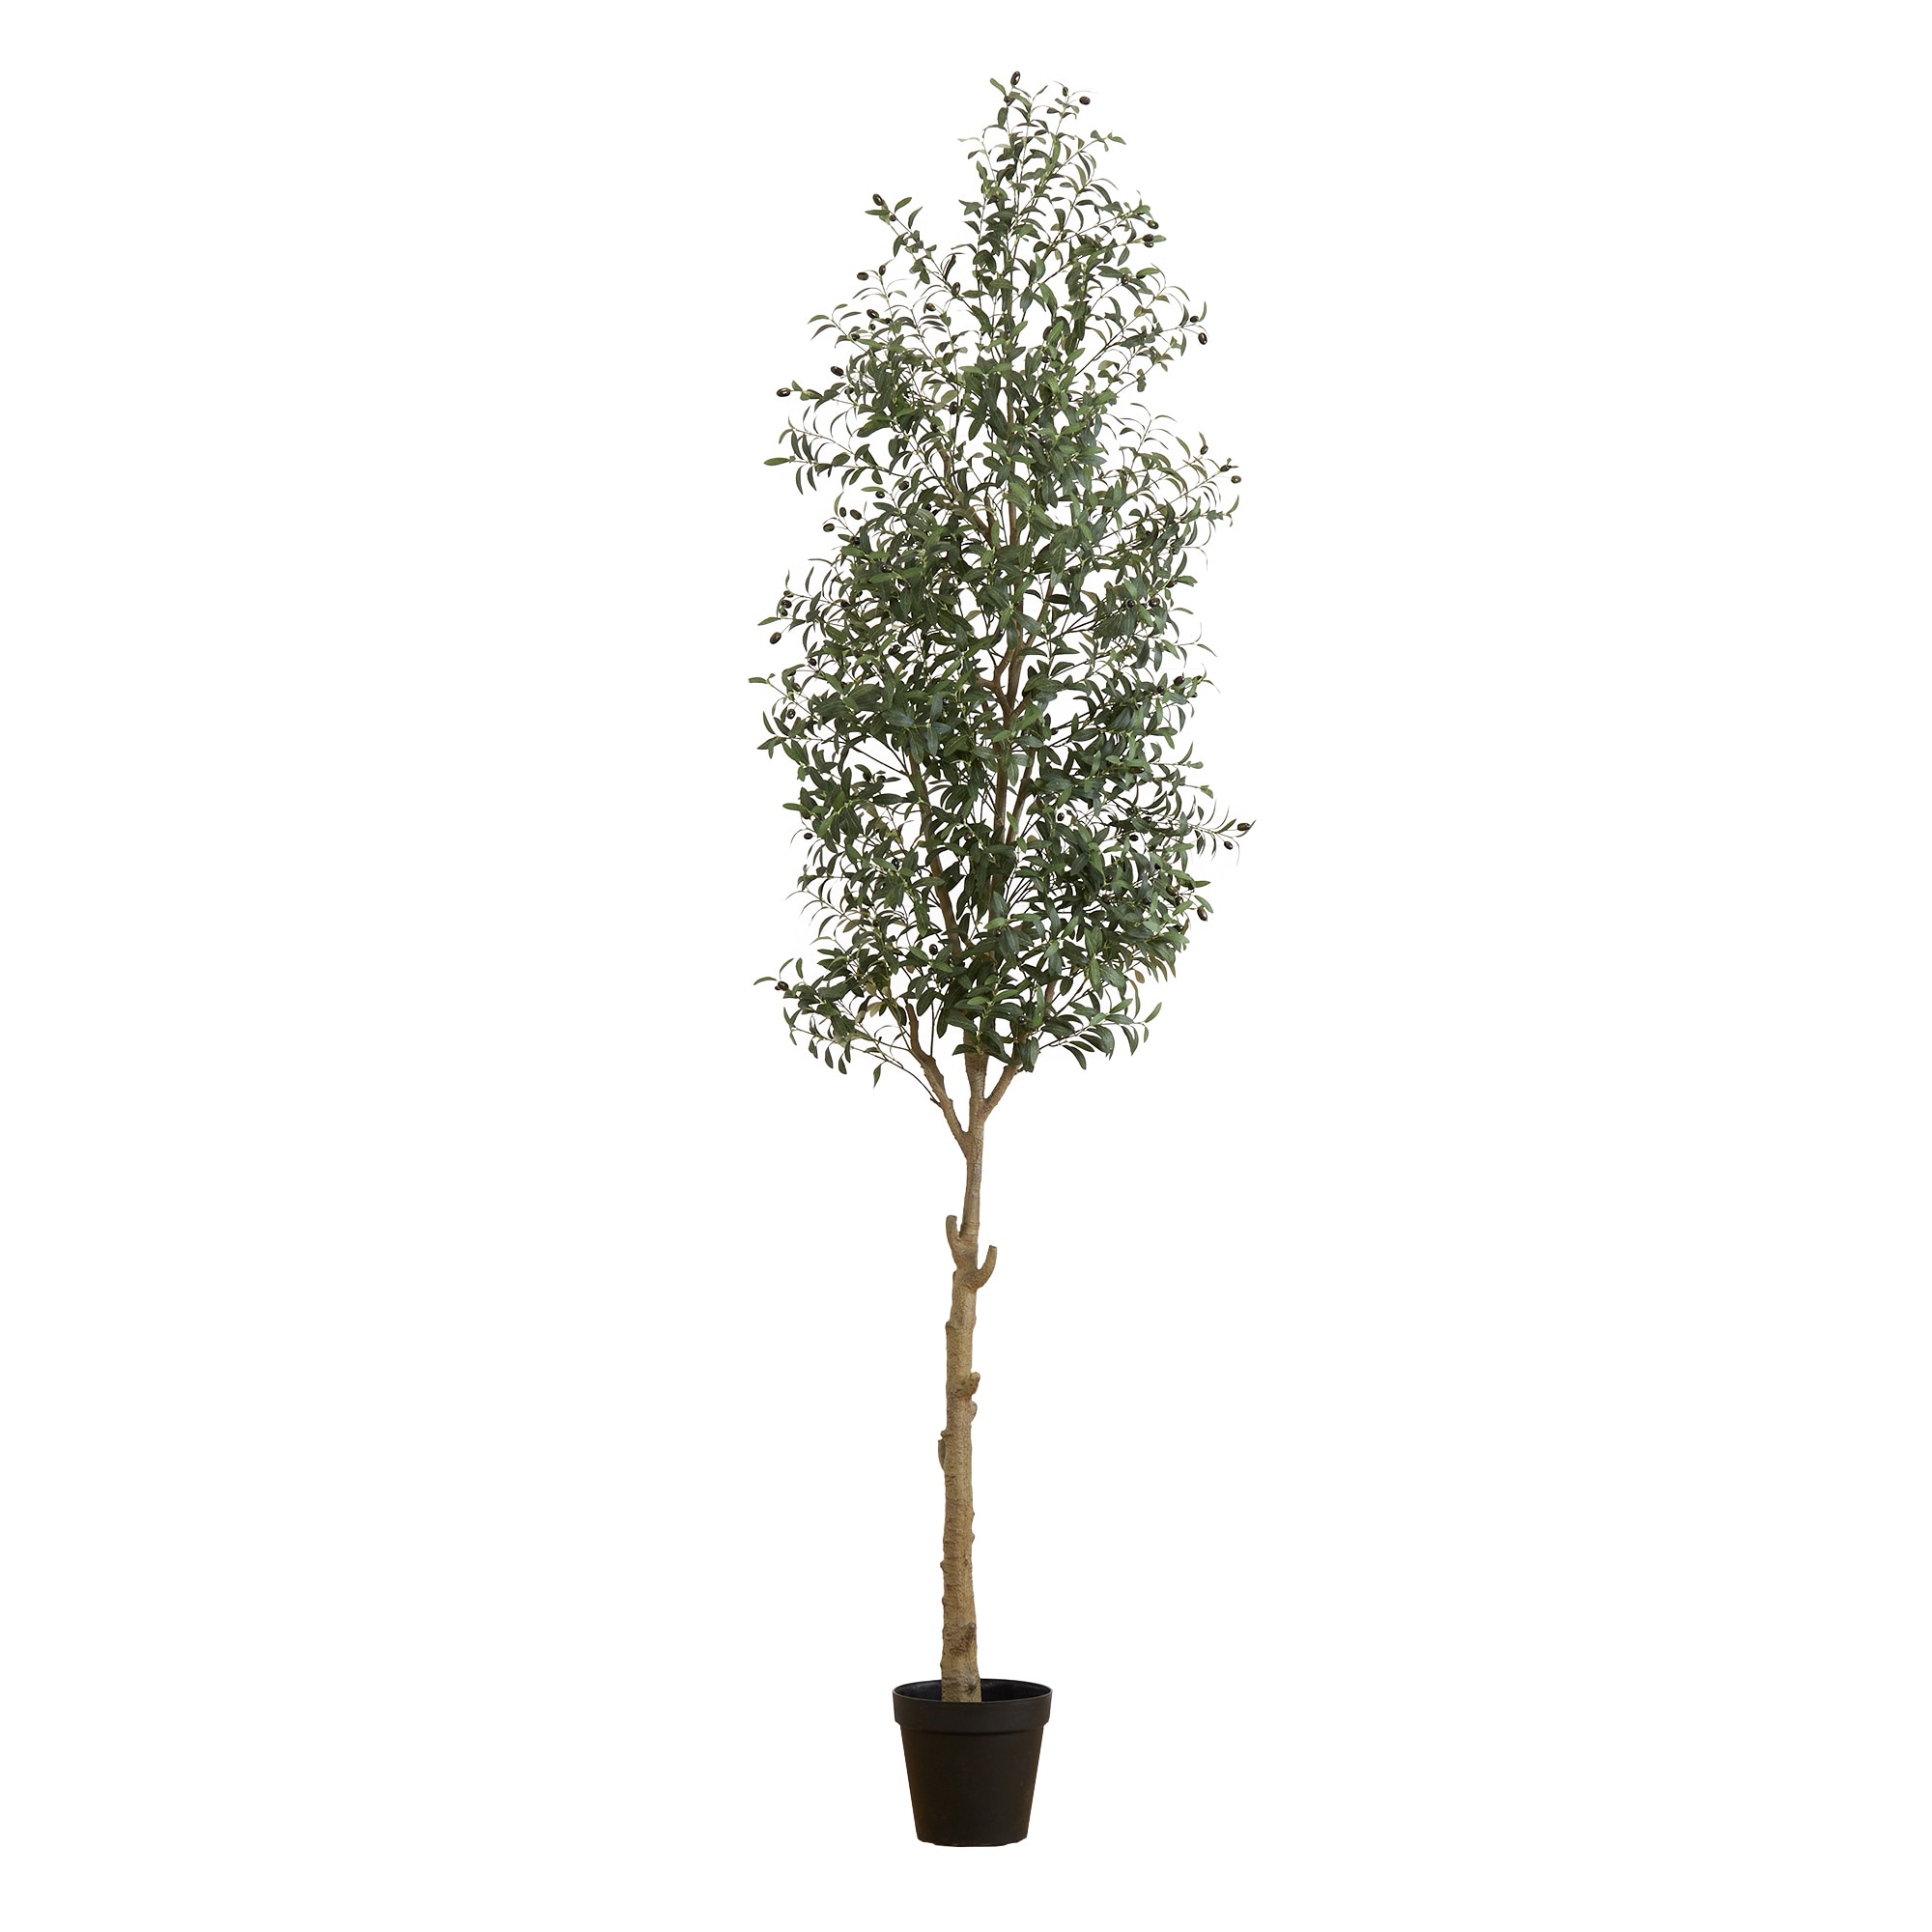  Fake Olive Tree, Artificial Tree, Olive Trees Artificial  Indoor, Faux Olive Tree, Nearly Natural Artificial Plants for Home Decor,  Room Deco 2m : Home & Kitchen